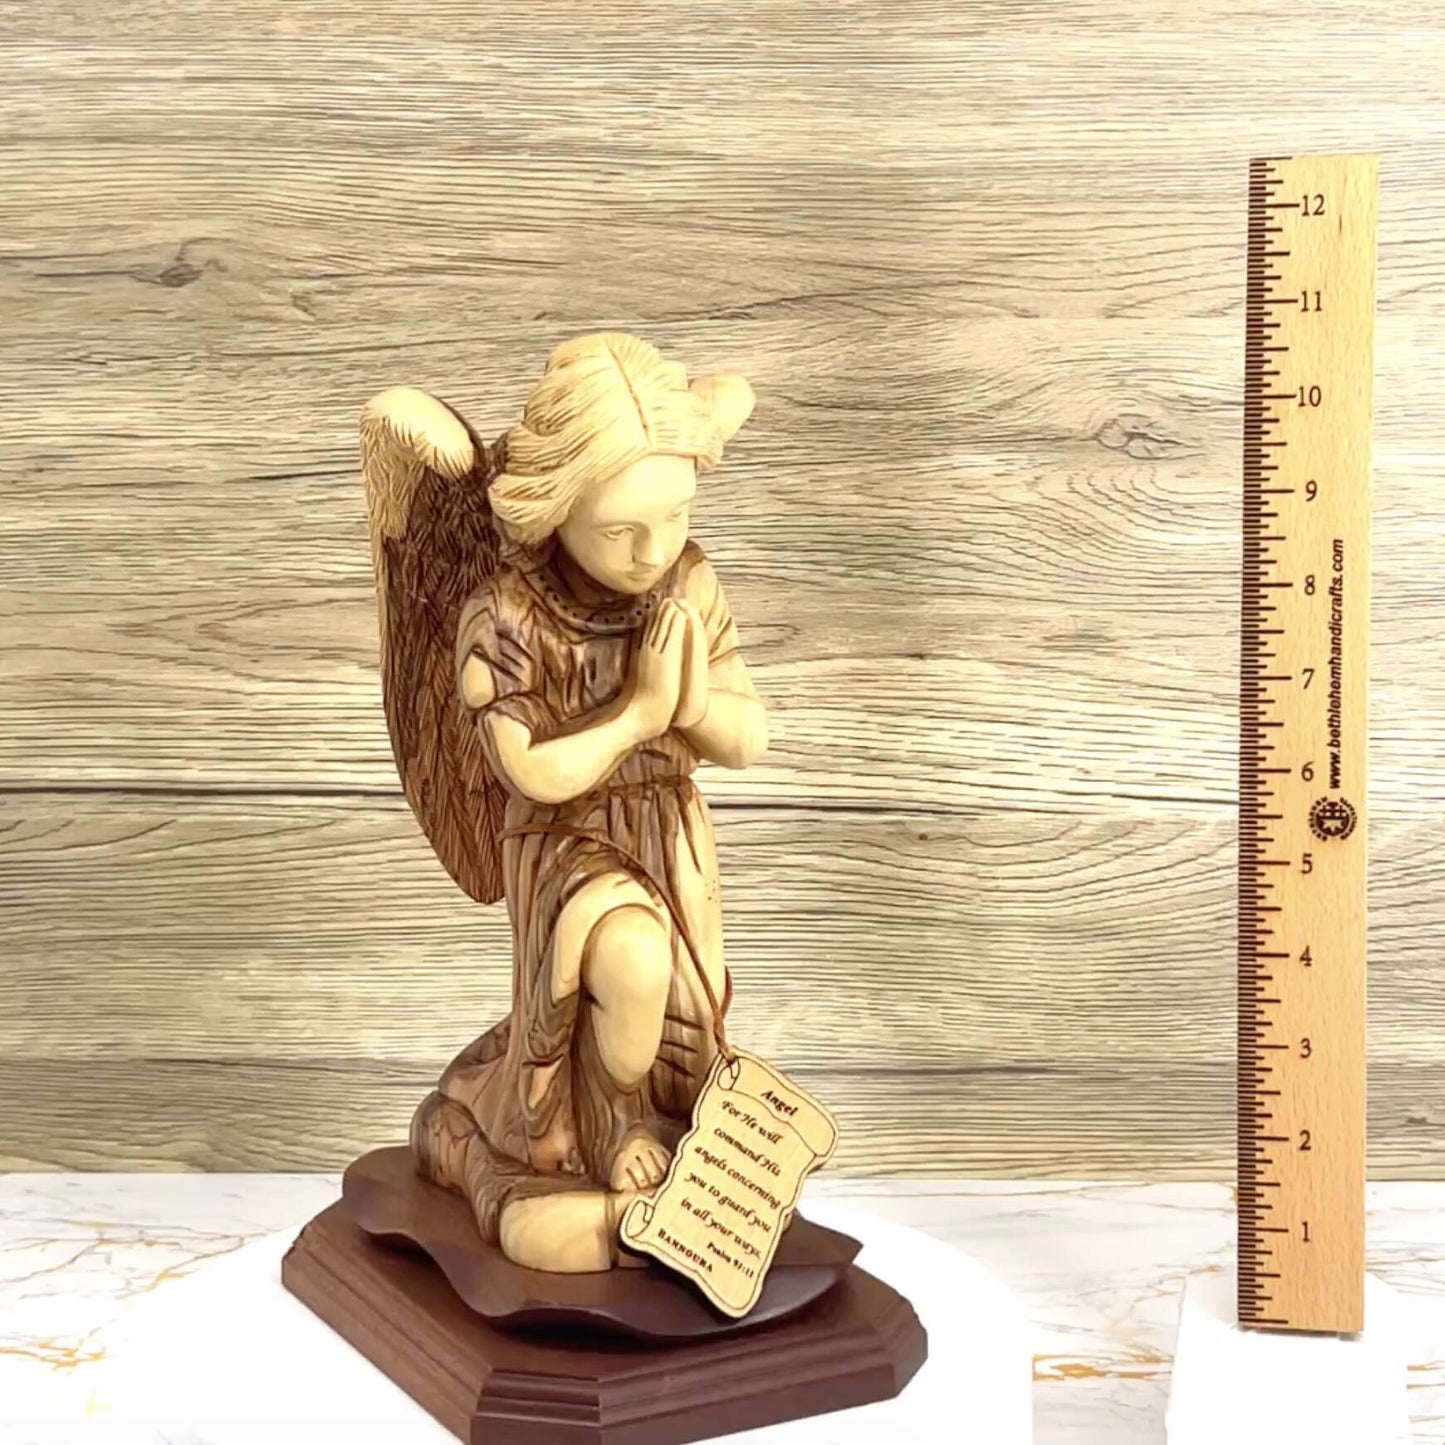 Guardian Angel Praying Carving 10.5" Hand made from Holy Land Olive Wood